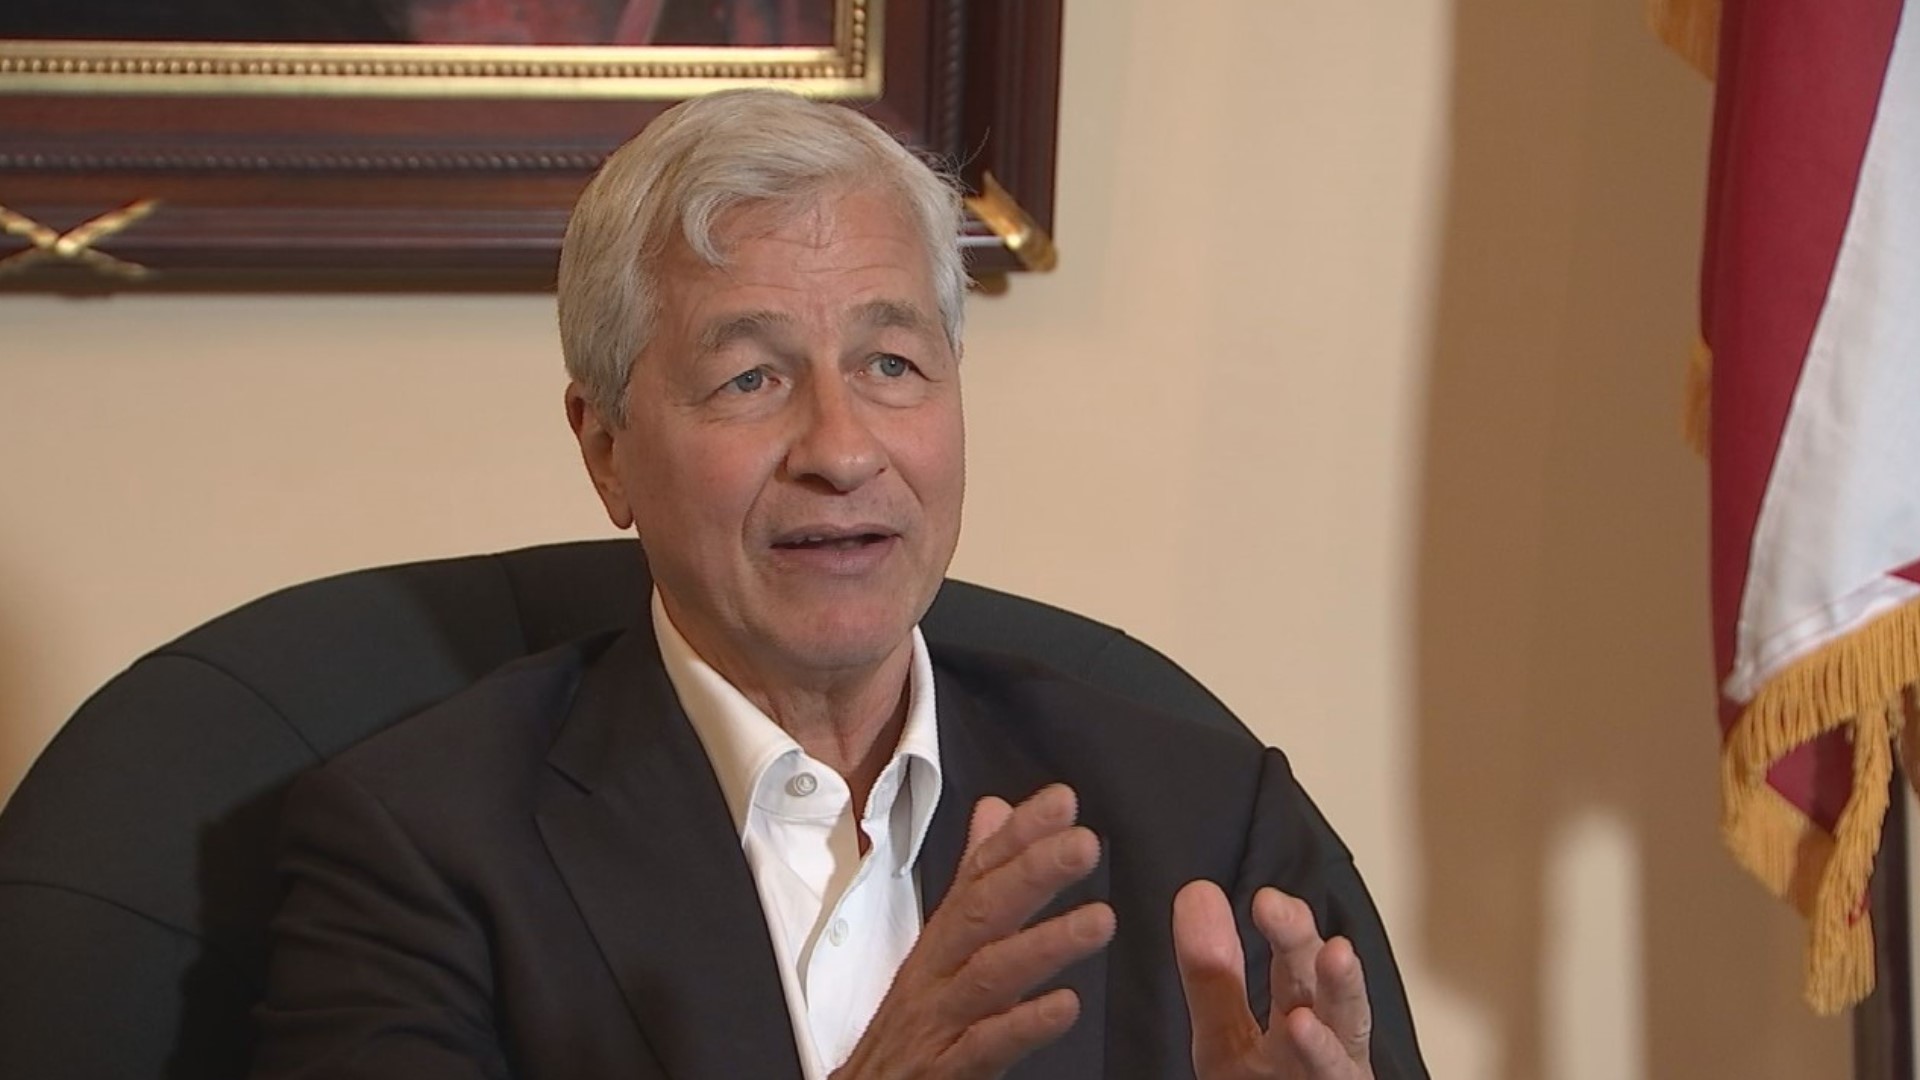 Jamie Dimon sat down with 10TV’s Clay Gordon to discuss workforce cuts and Columbus’ business boom